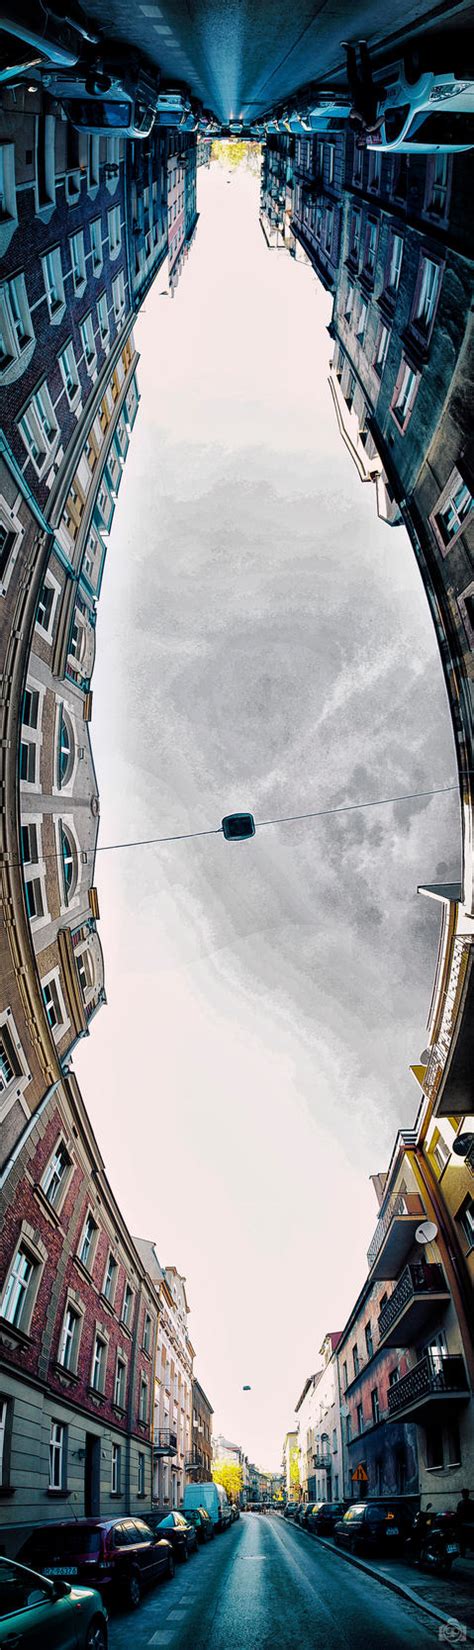 Vertical Panorama By Wrbl On Deviantart